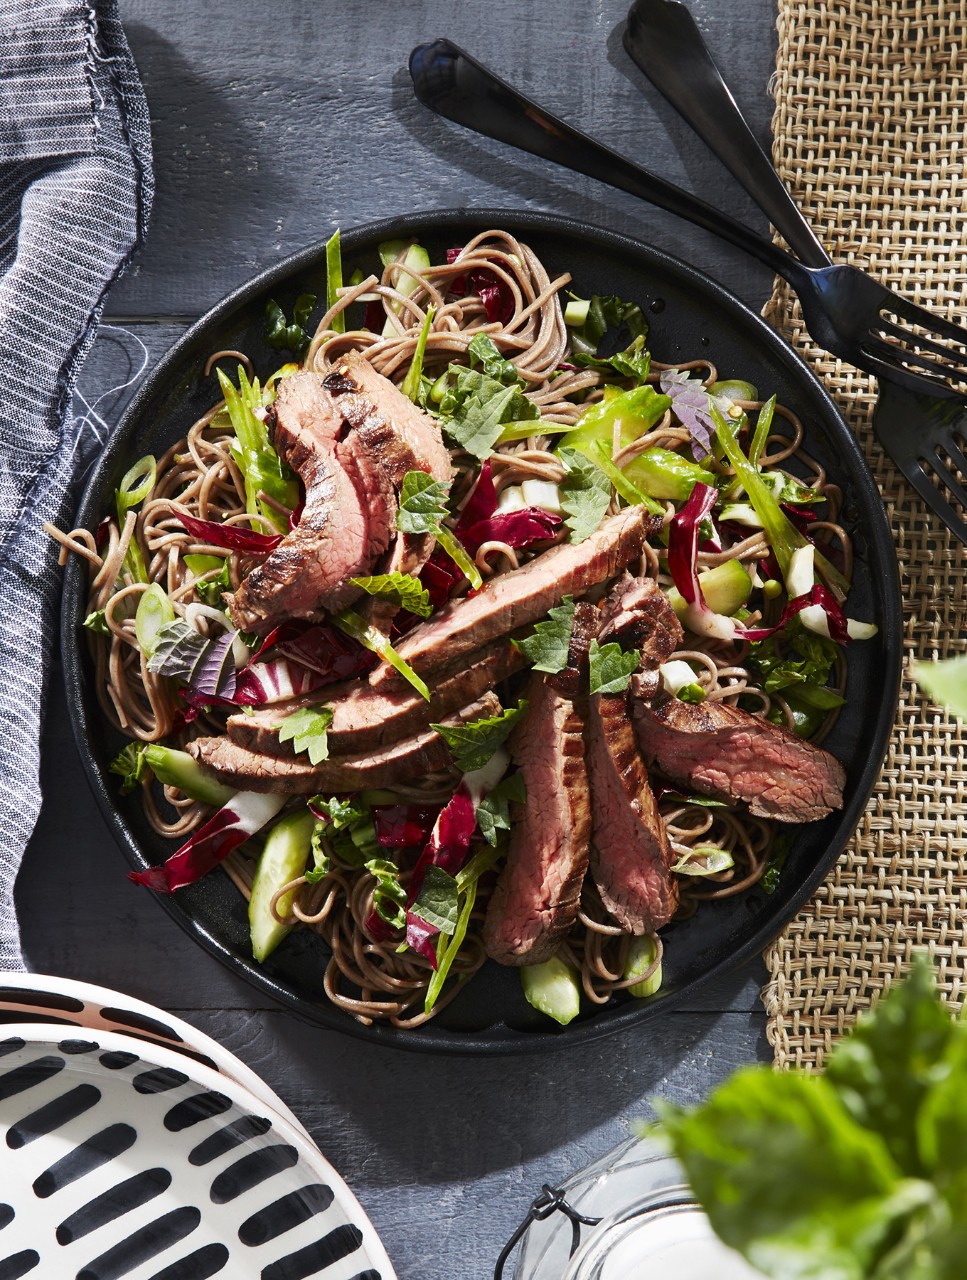 Japanese Noodle and Vegetable Salad with Flank Steak